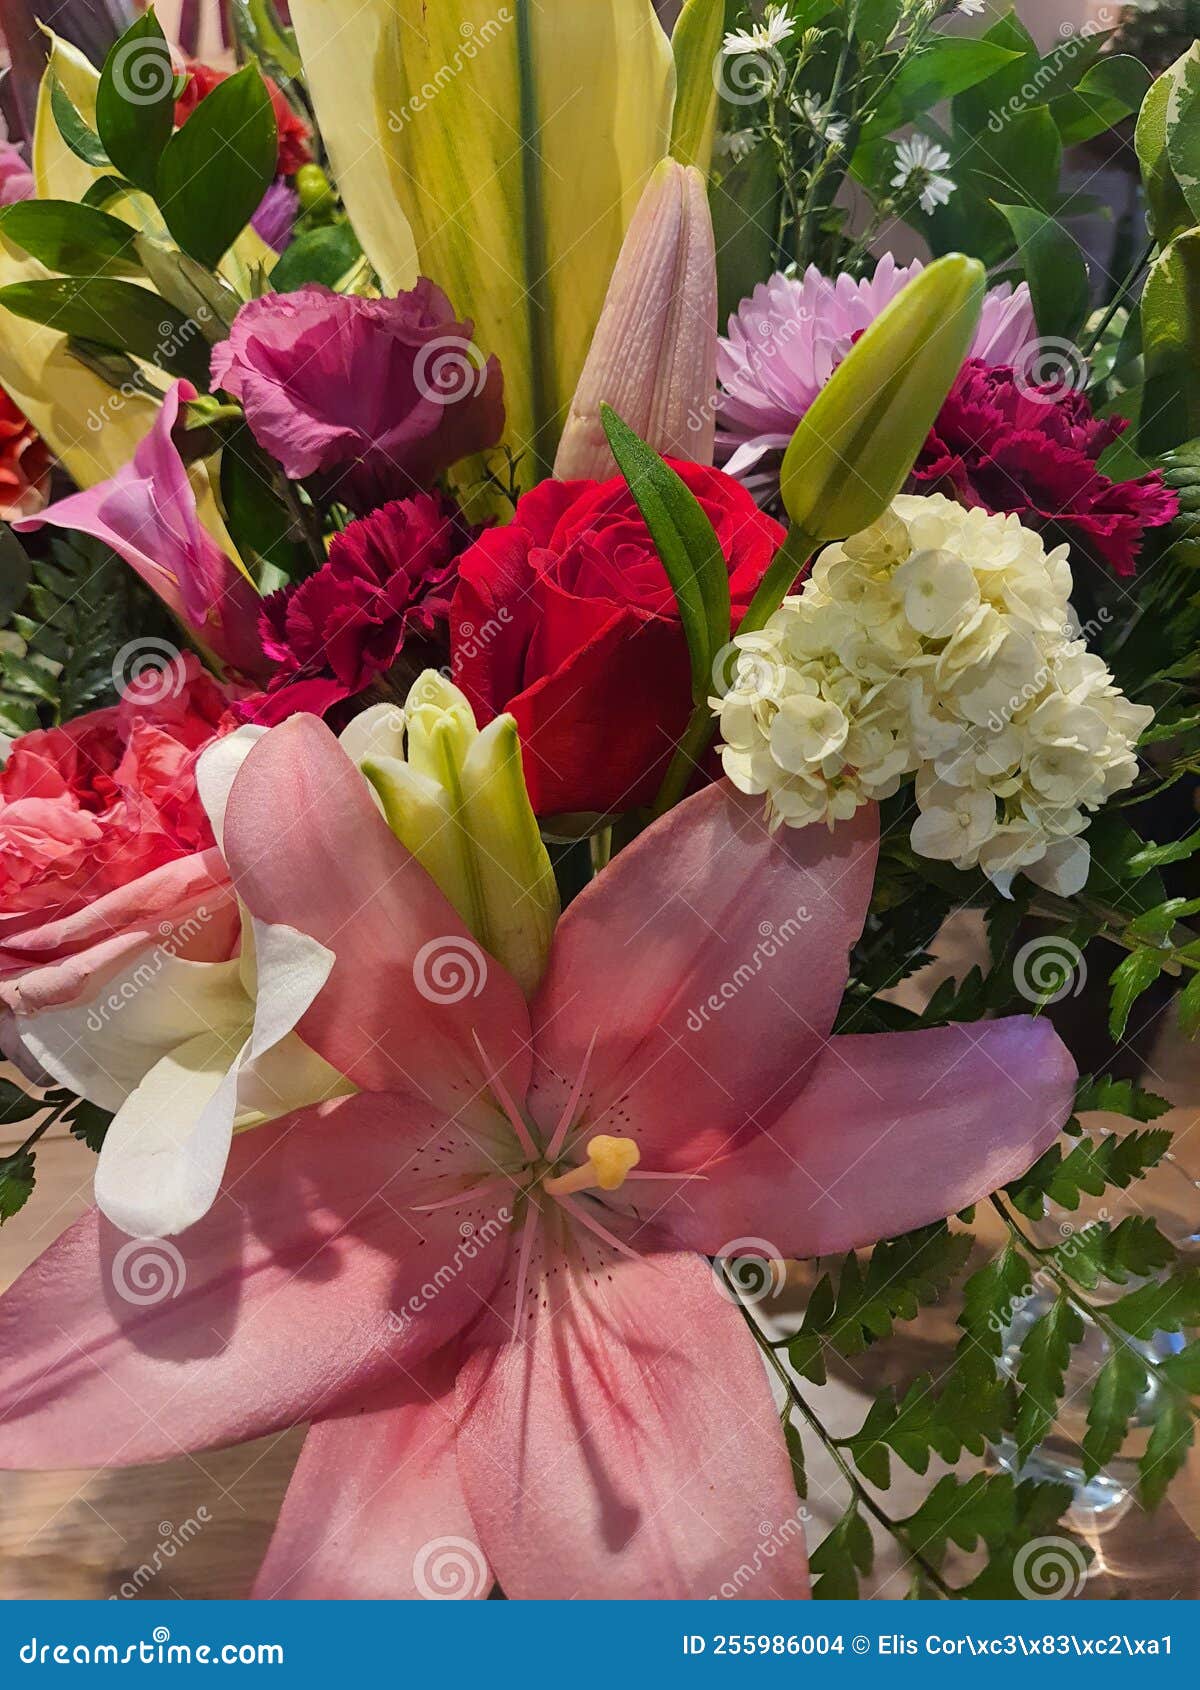 beautiful bouquet of colorful blooming flowers, full screen.